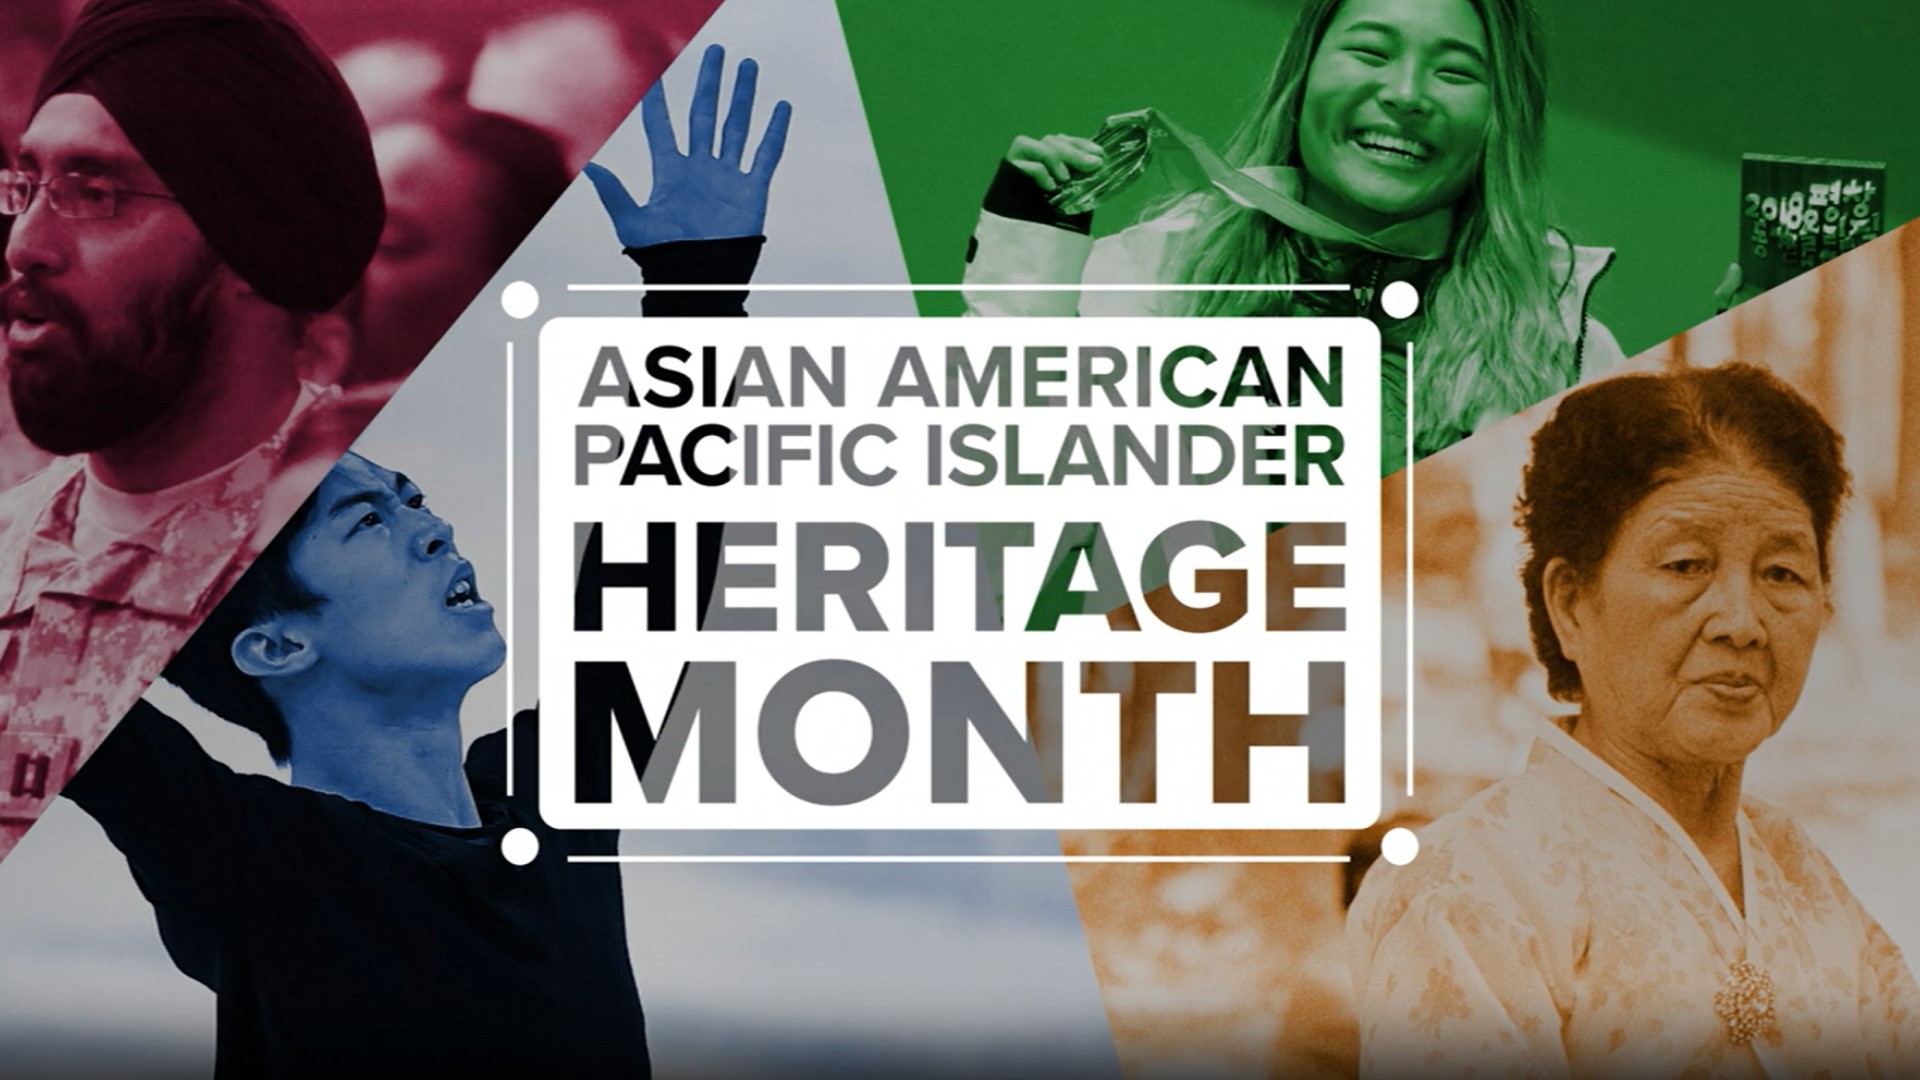 May 1 marks the celebration of the history and accomplishments of the Asian American and Pacific Islander communities.